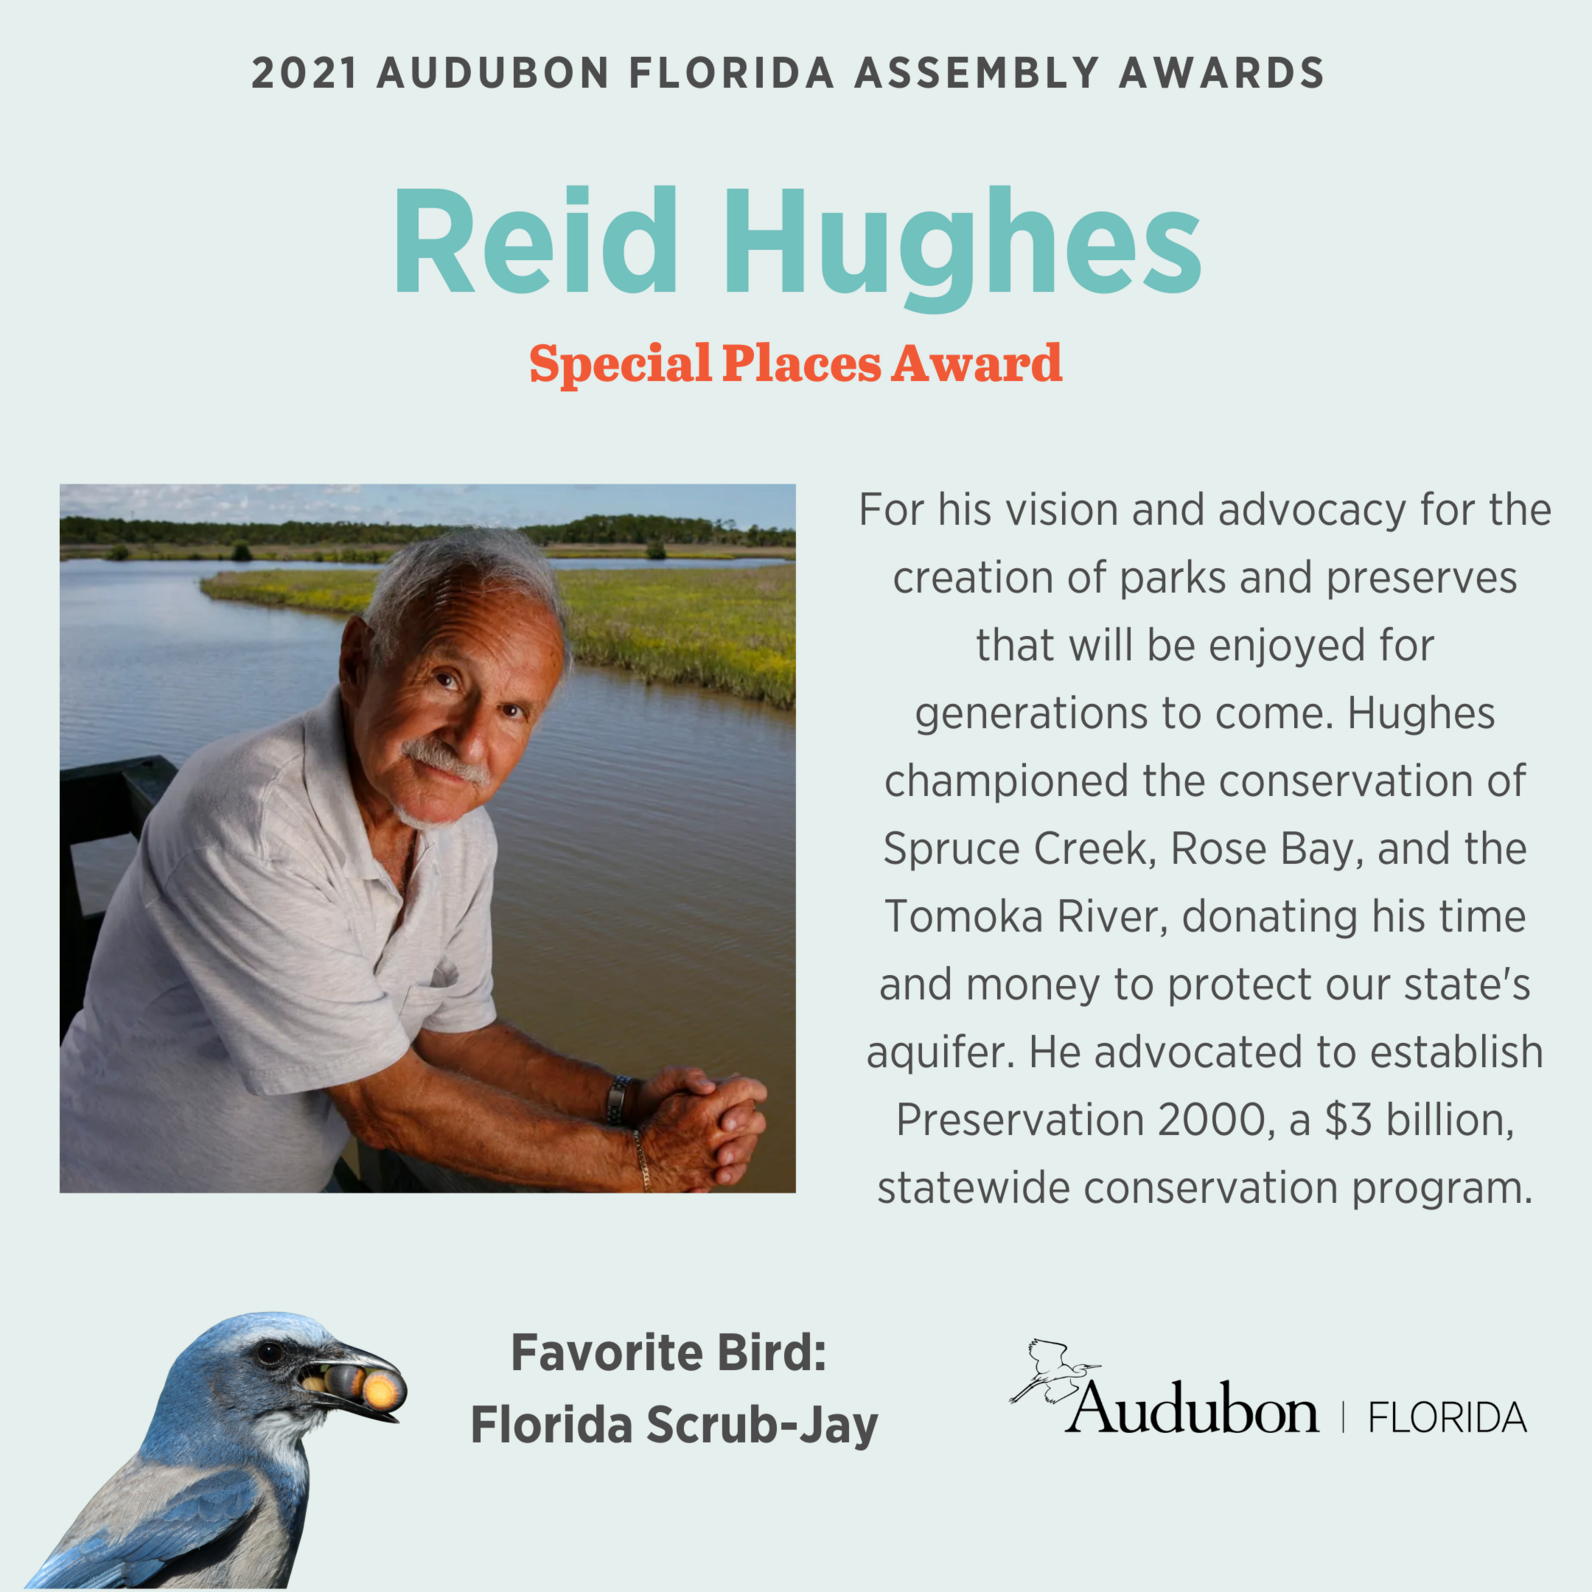 Graphic of Reid Hughes, with his favorite bird - a Swallow-tailed Kite - and repeated language from the article about why he won the award.